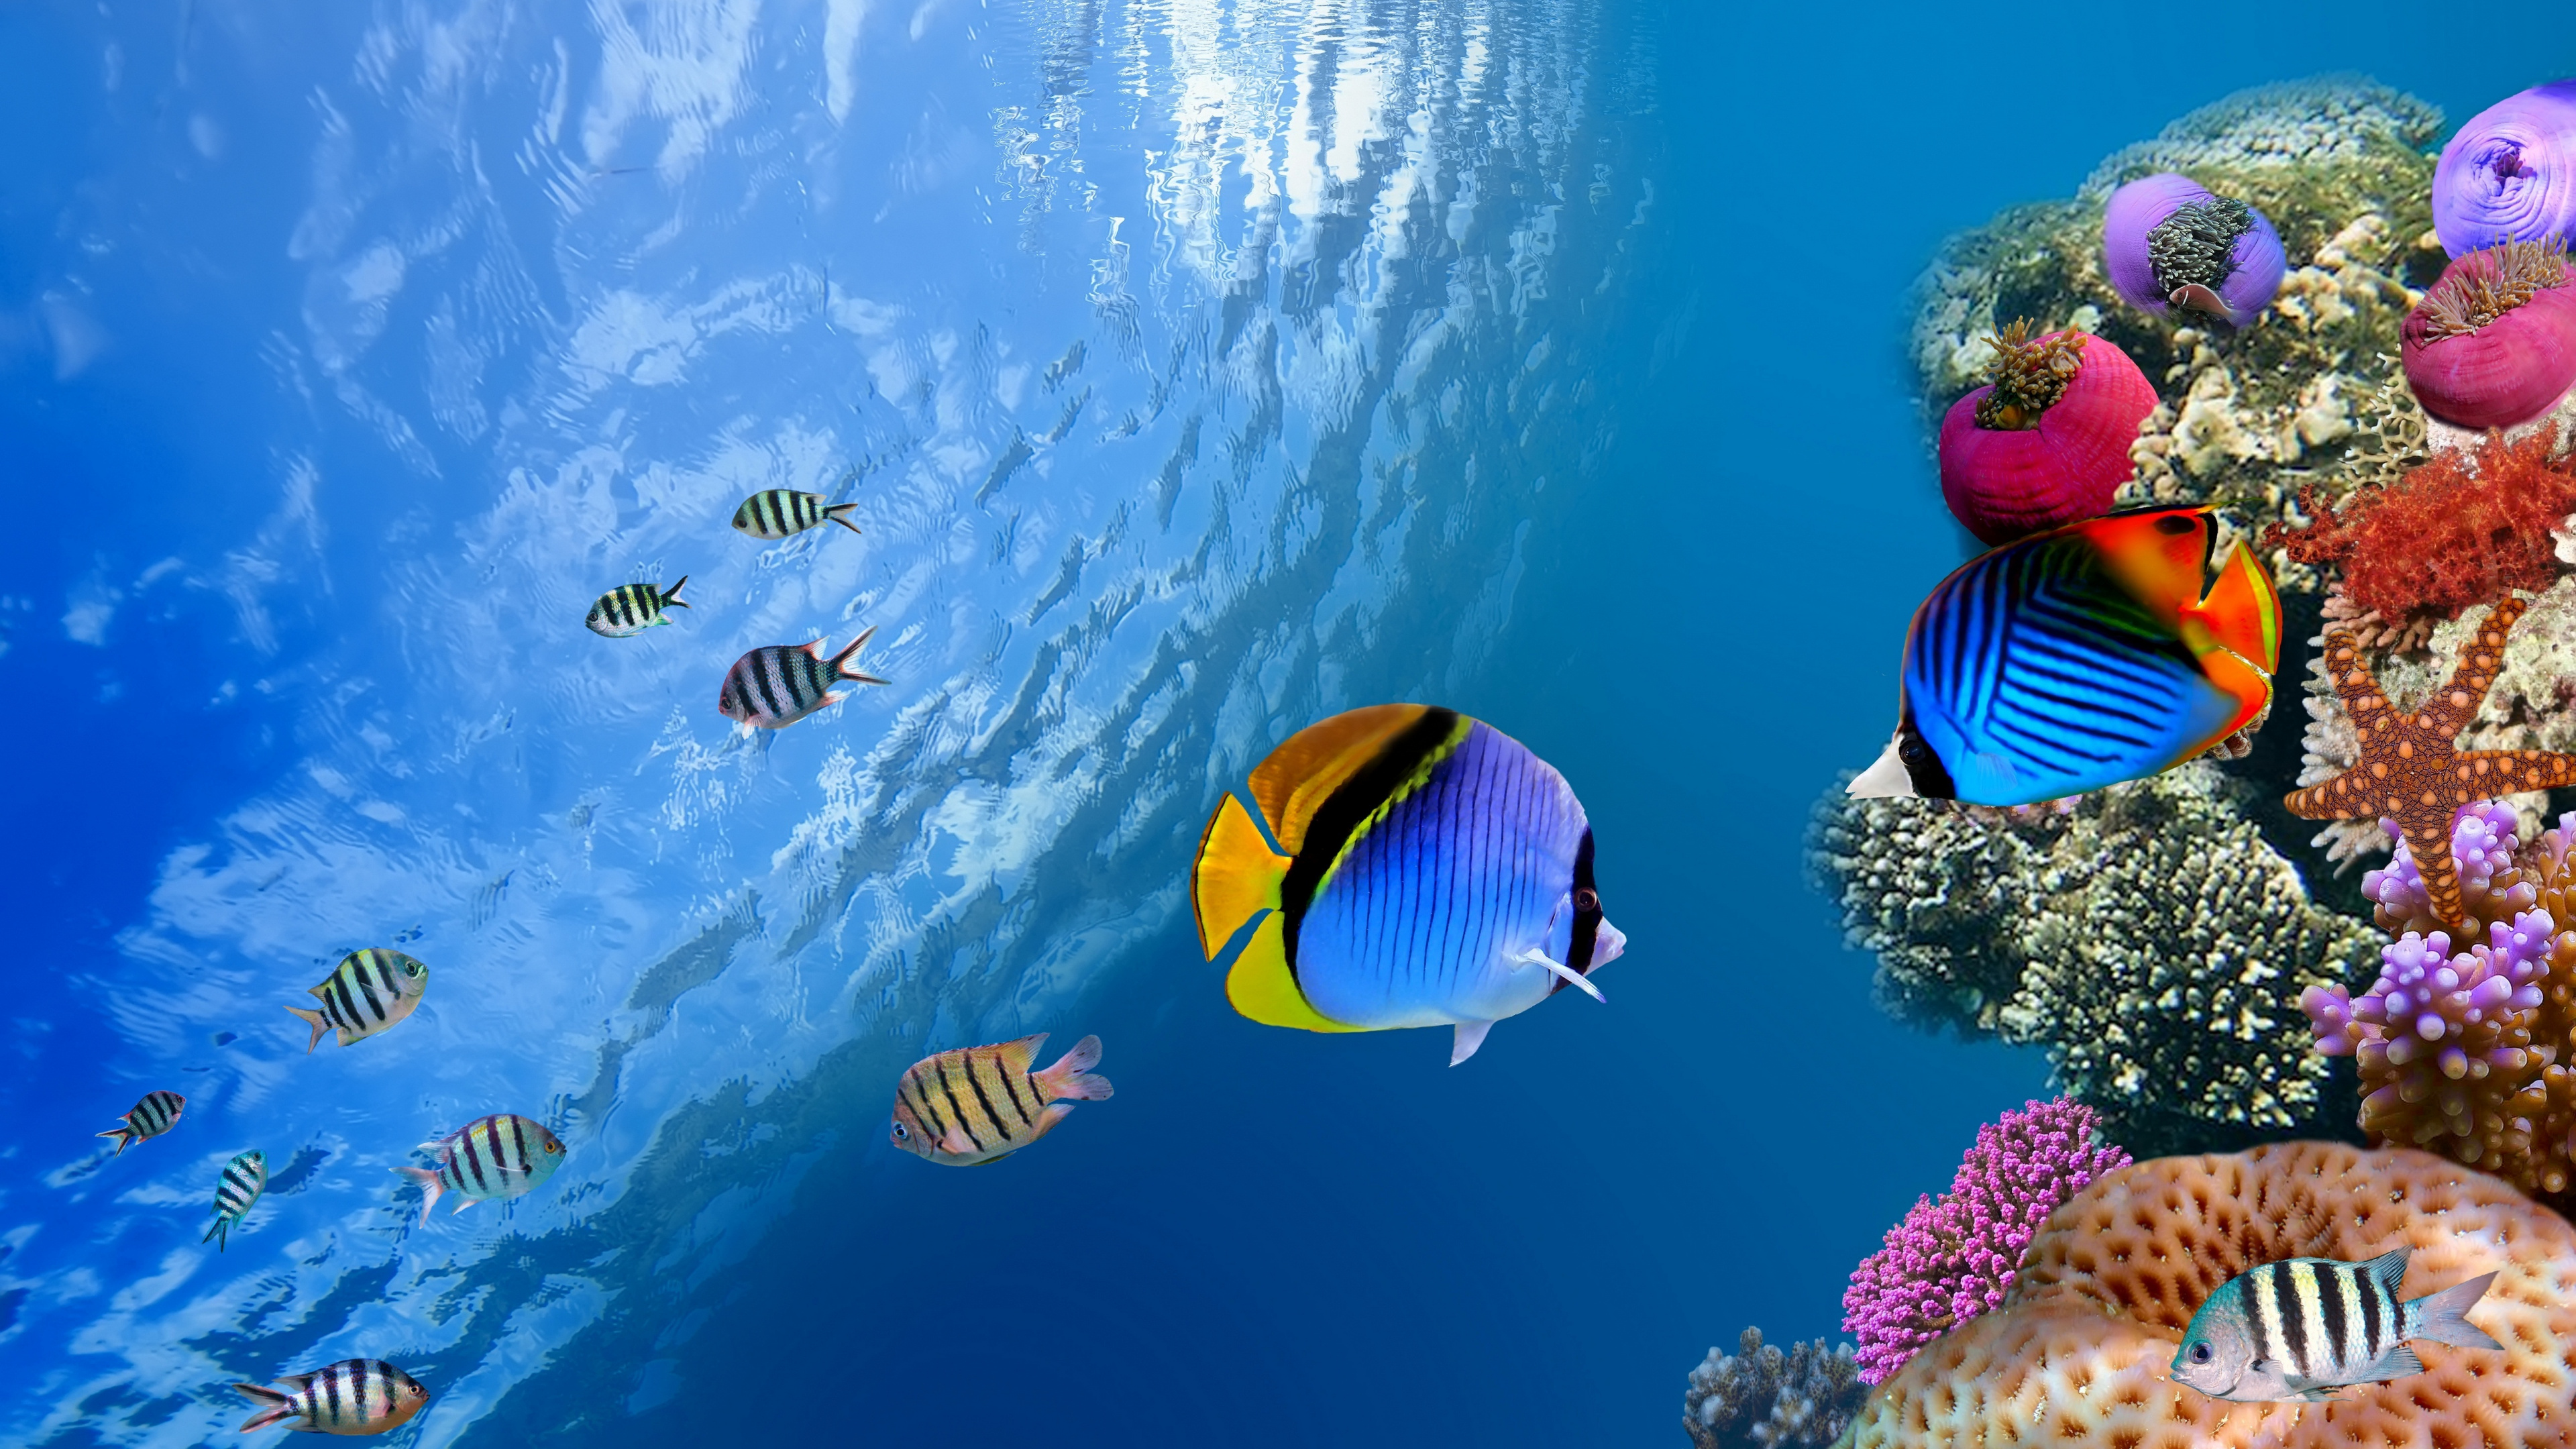 Man in Blue and White Striped Shirt With Blue and Yellow Fish in Water. Wallpaper in 3840x2160 Resolution